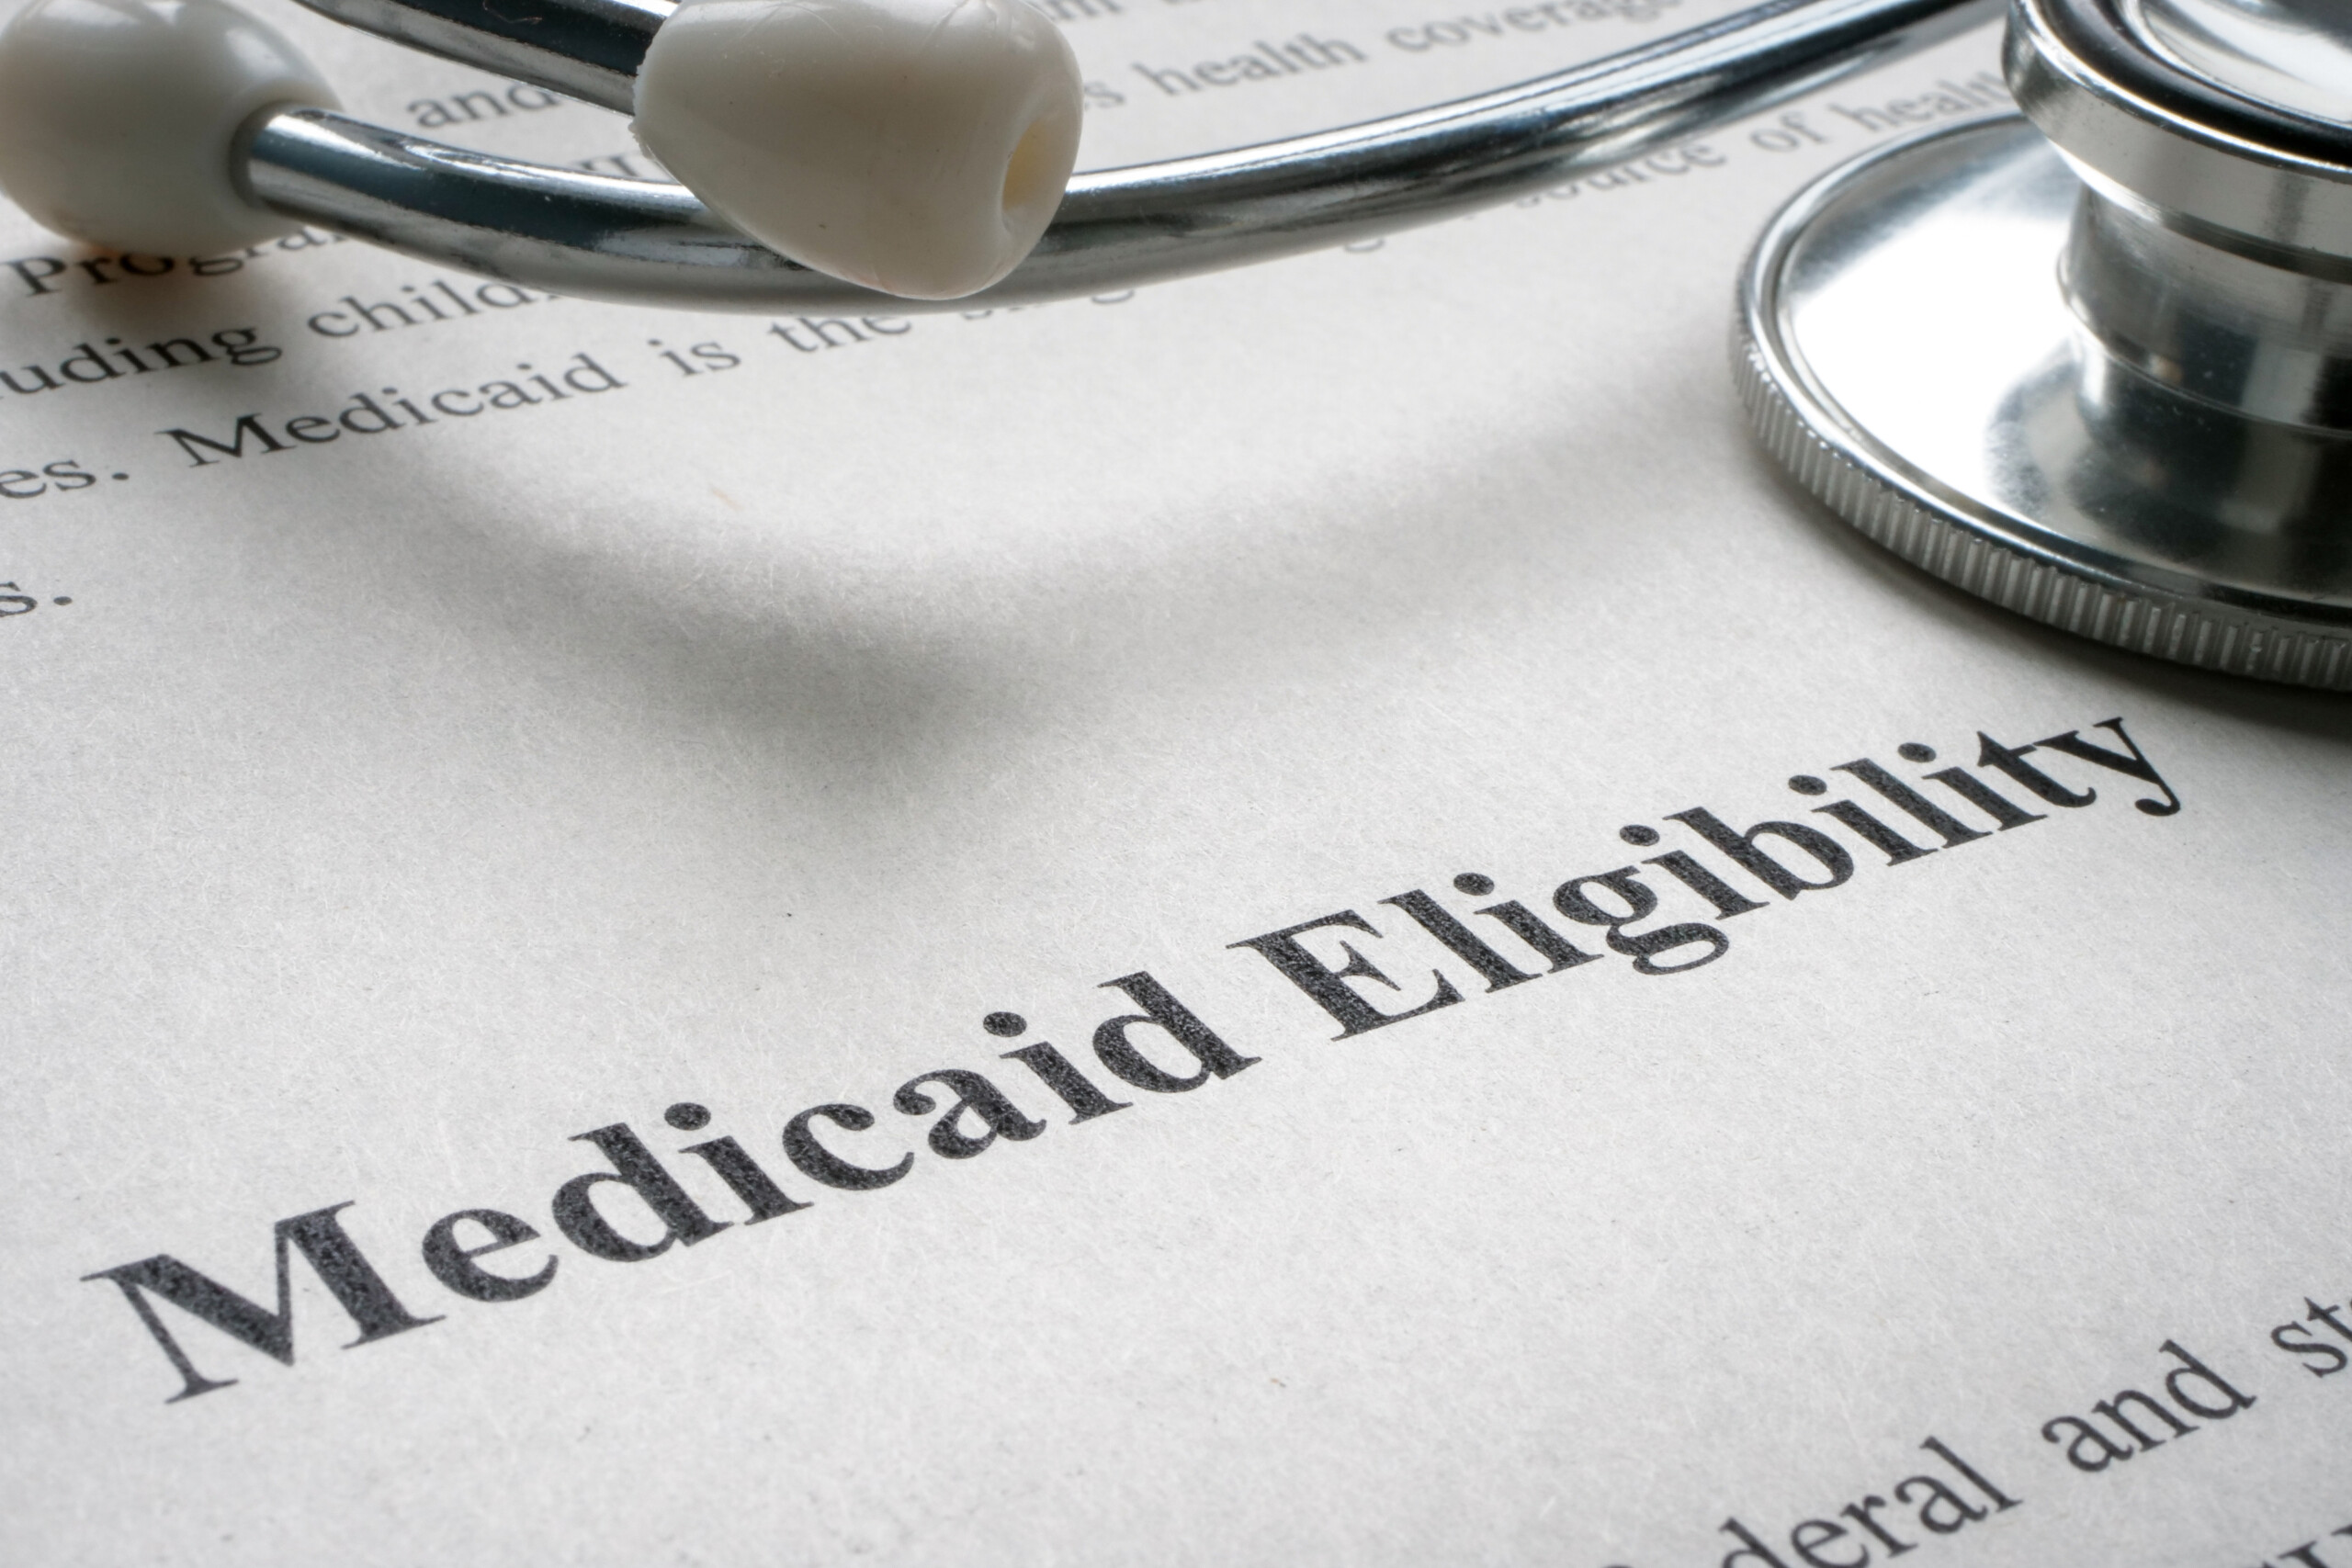 medicaid-unwinding-deals-blow-to-tenuous-system-of-care-for-native-americans-–-kff-health-news